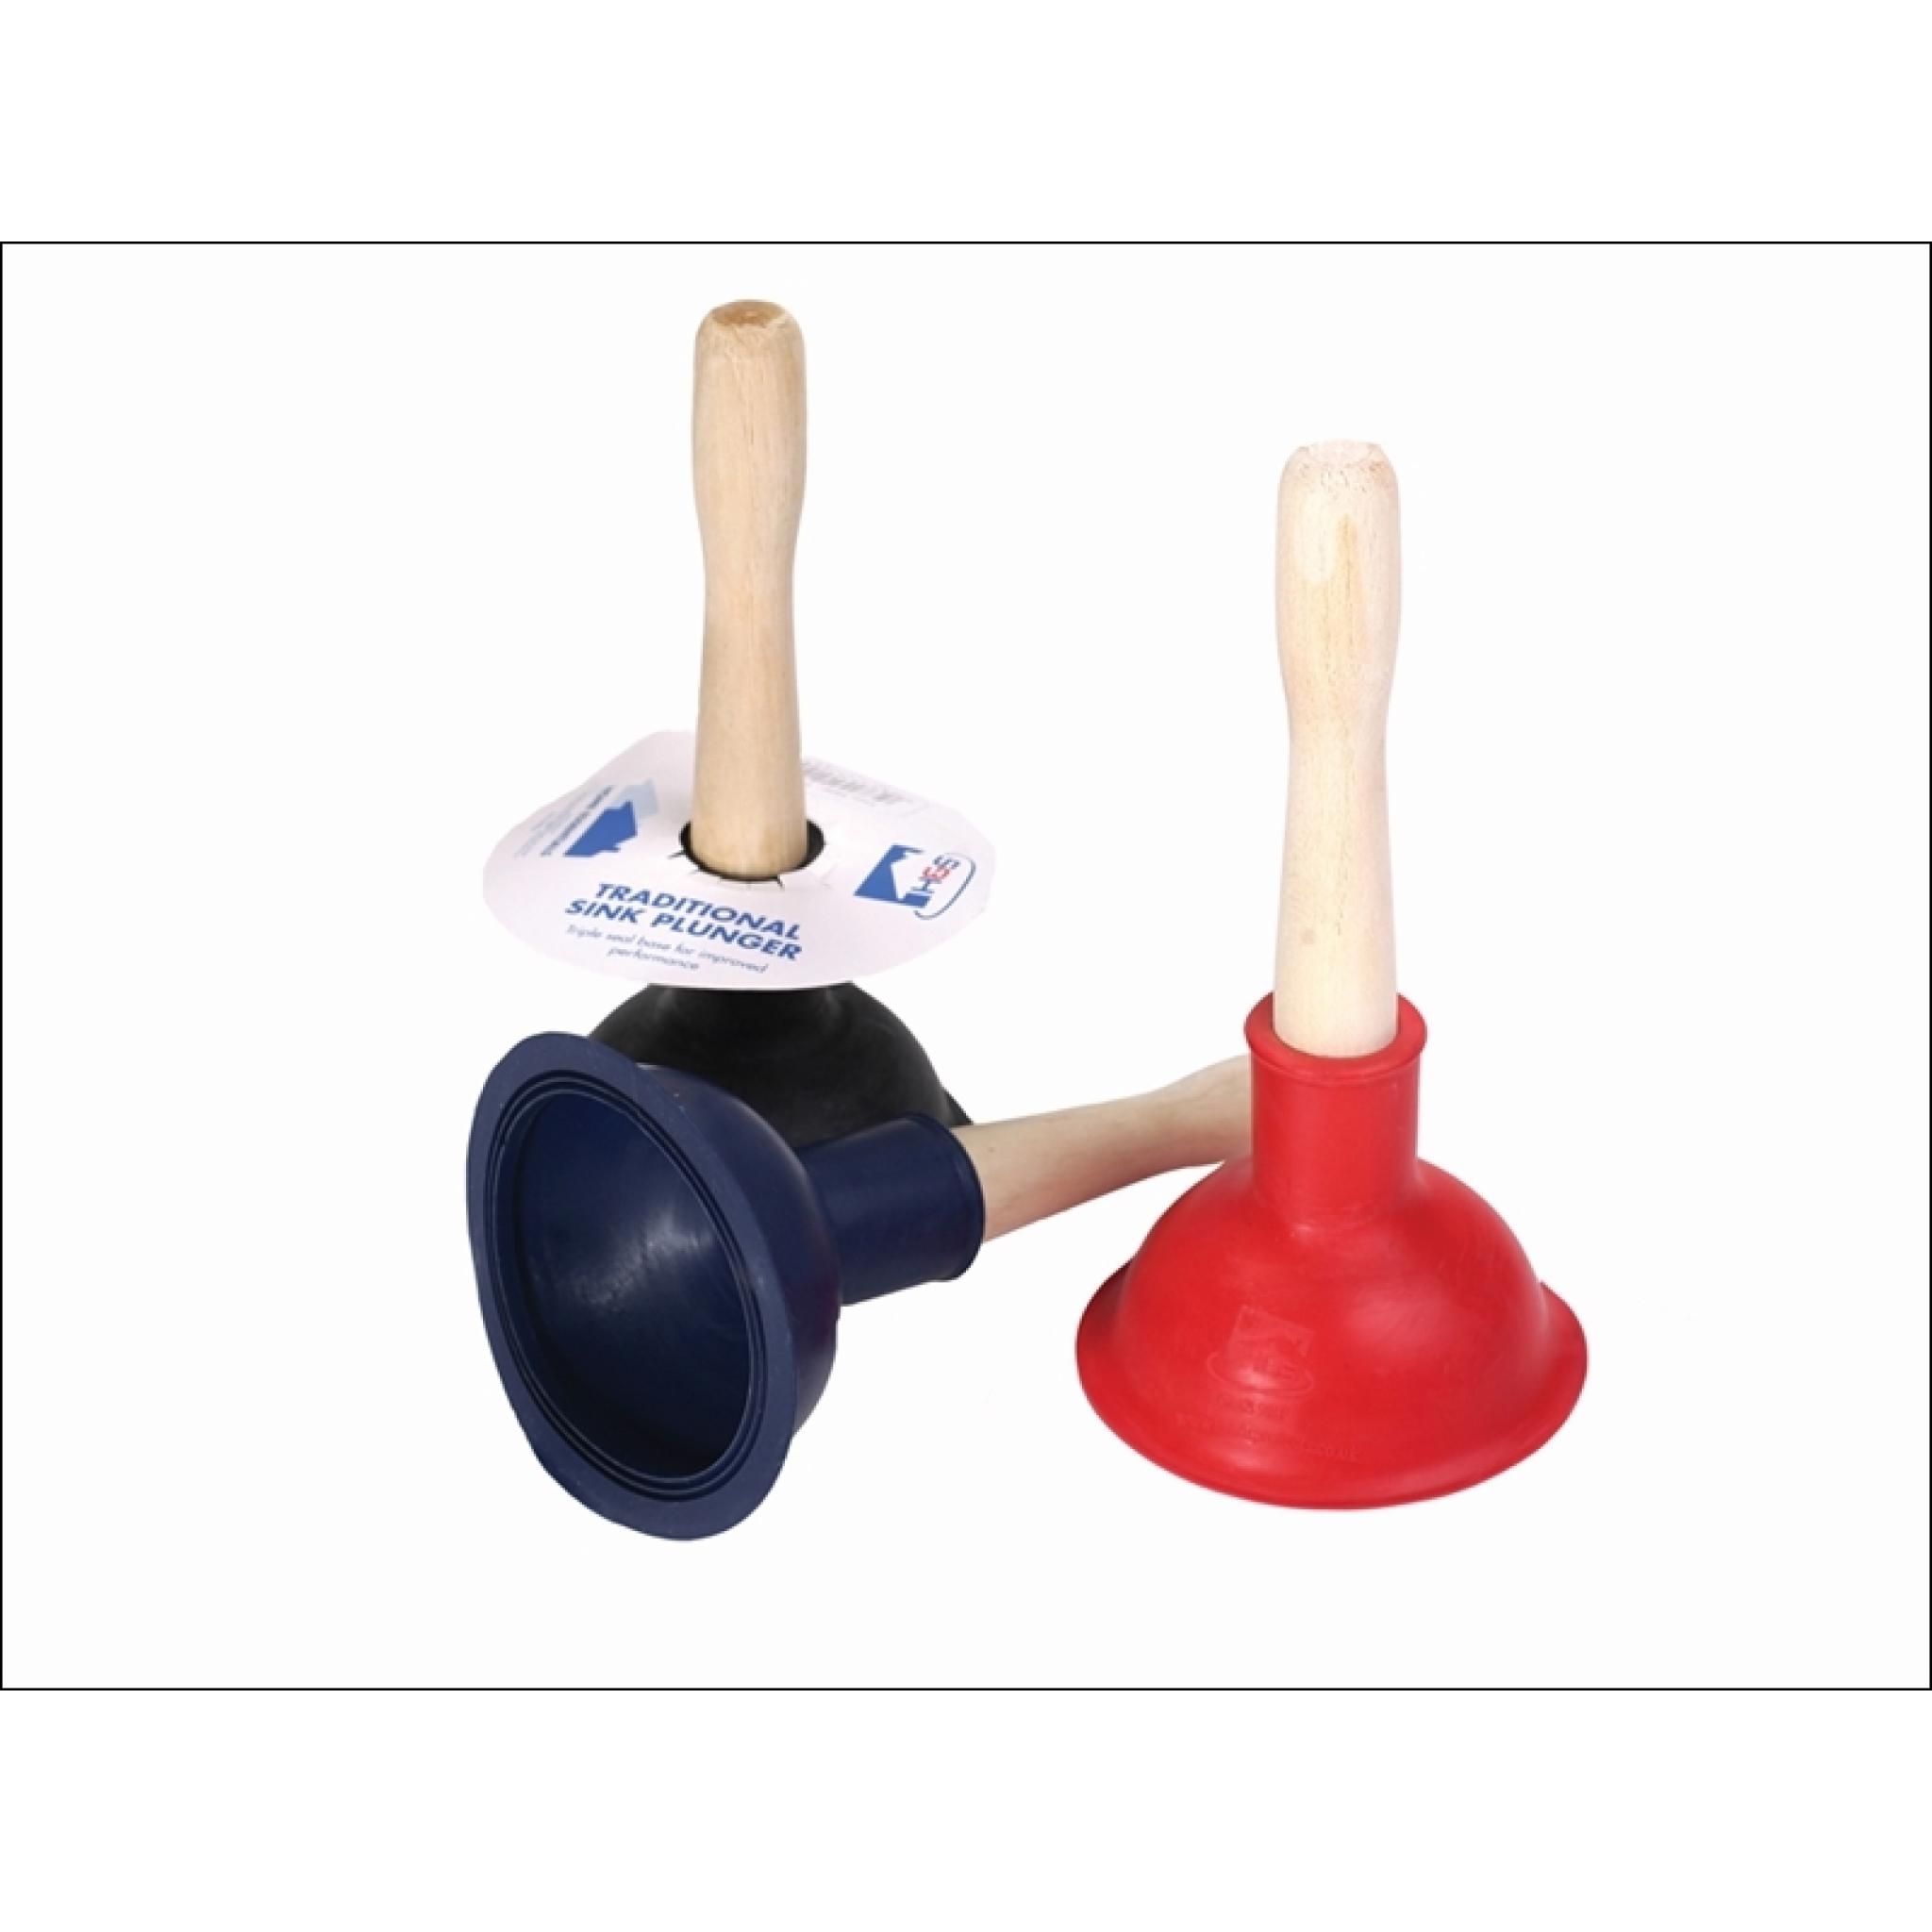 H S 5800 Sink Plunger Small 10cm Staines And Brights